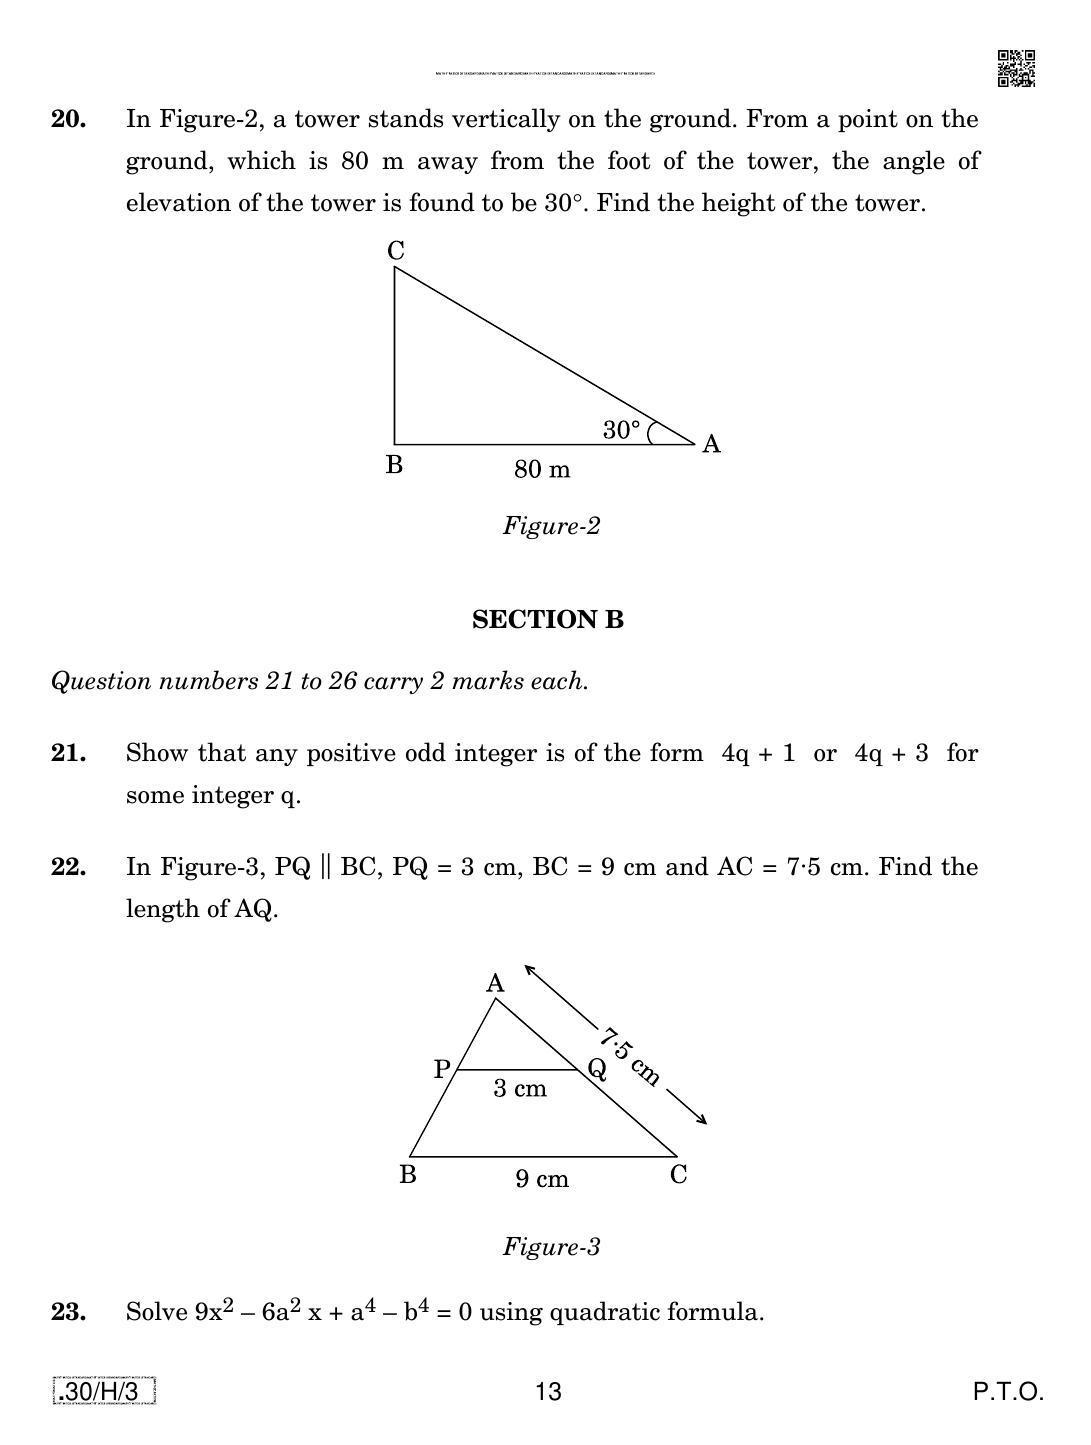 CBSE Class 10 30-C-3 - Maths (Standard) 2020 Compartment Question Paper - Page 13